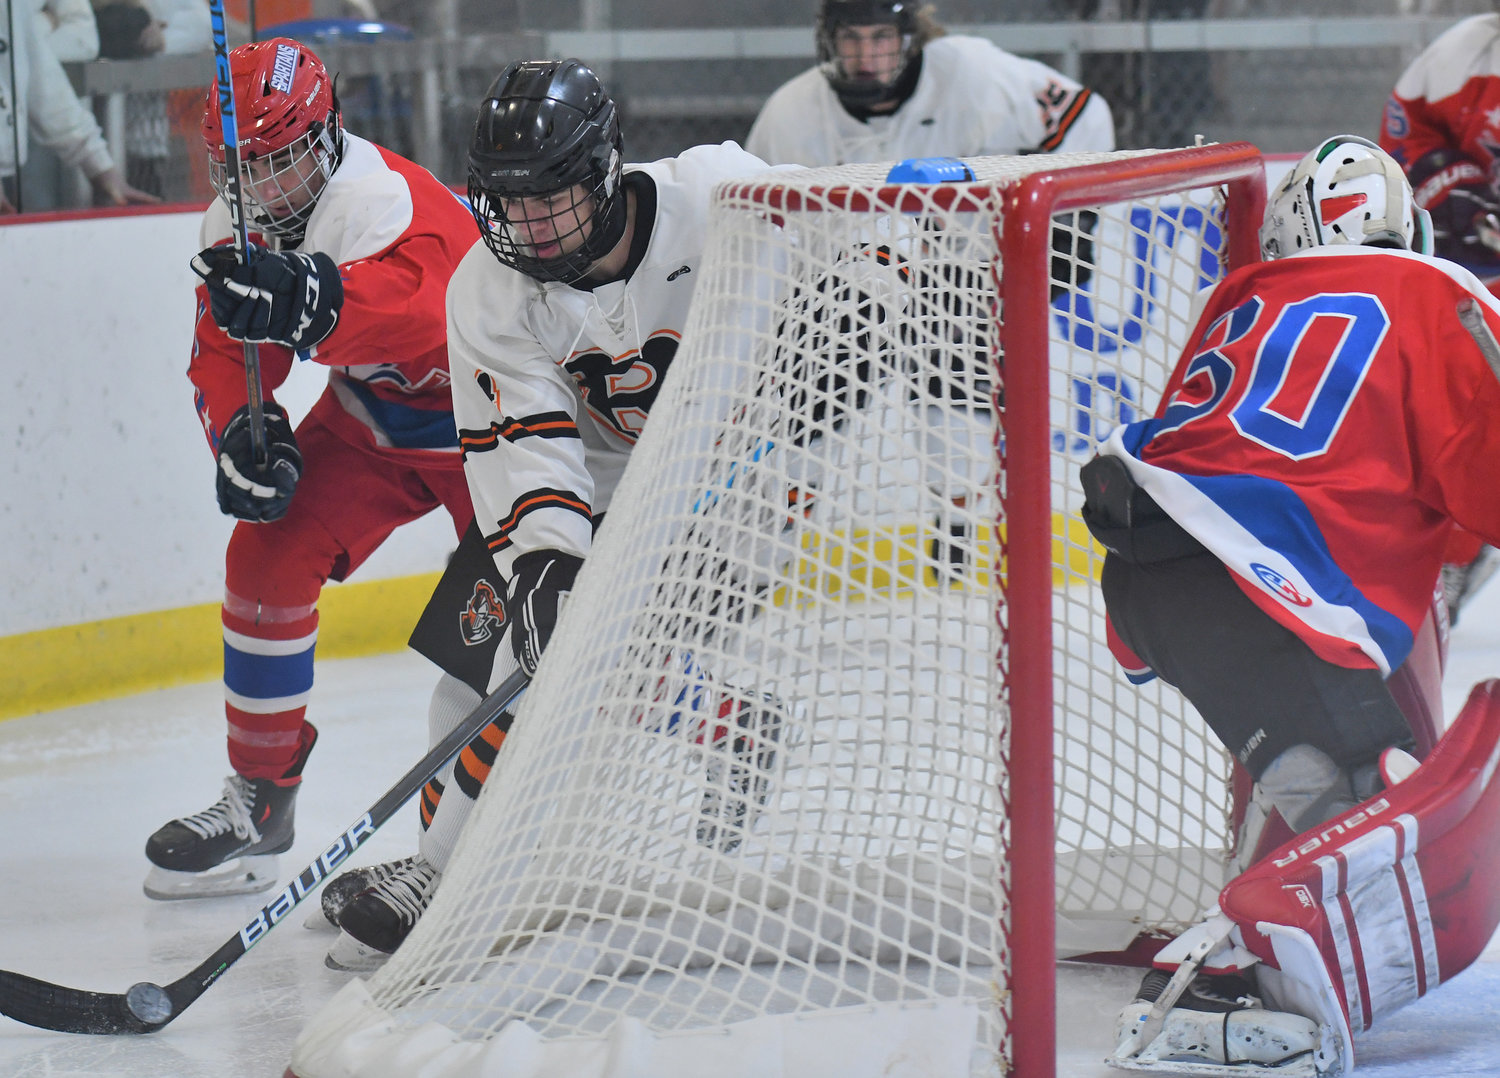 RFA's Tyler Wilson skates behind New Hartford goalie Michael Vetter with New Hartford's Rowan Gall chasing in the first period Friday night at Kennedy Arena.